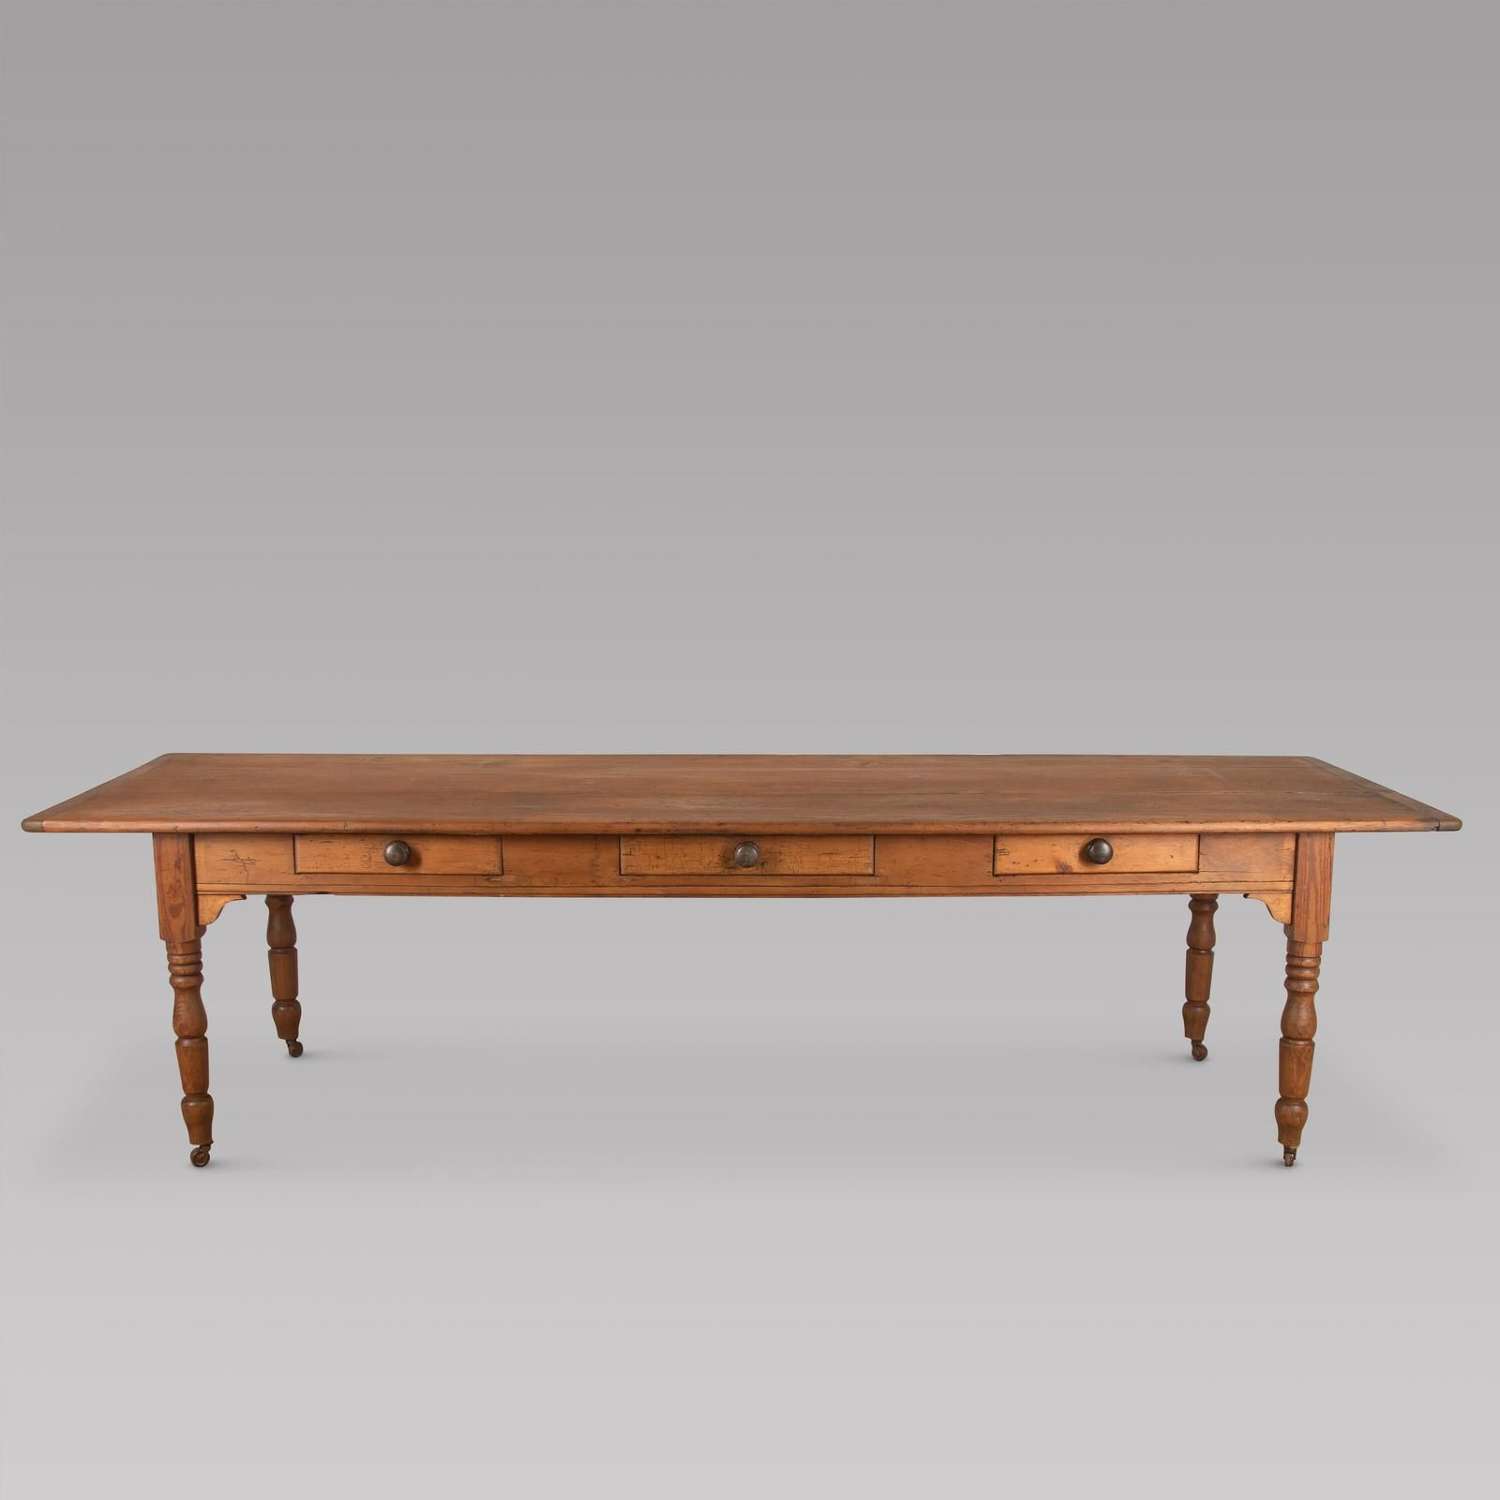 19th Century Pine French Country Farmhouse Table